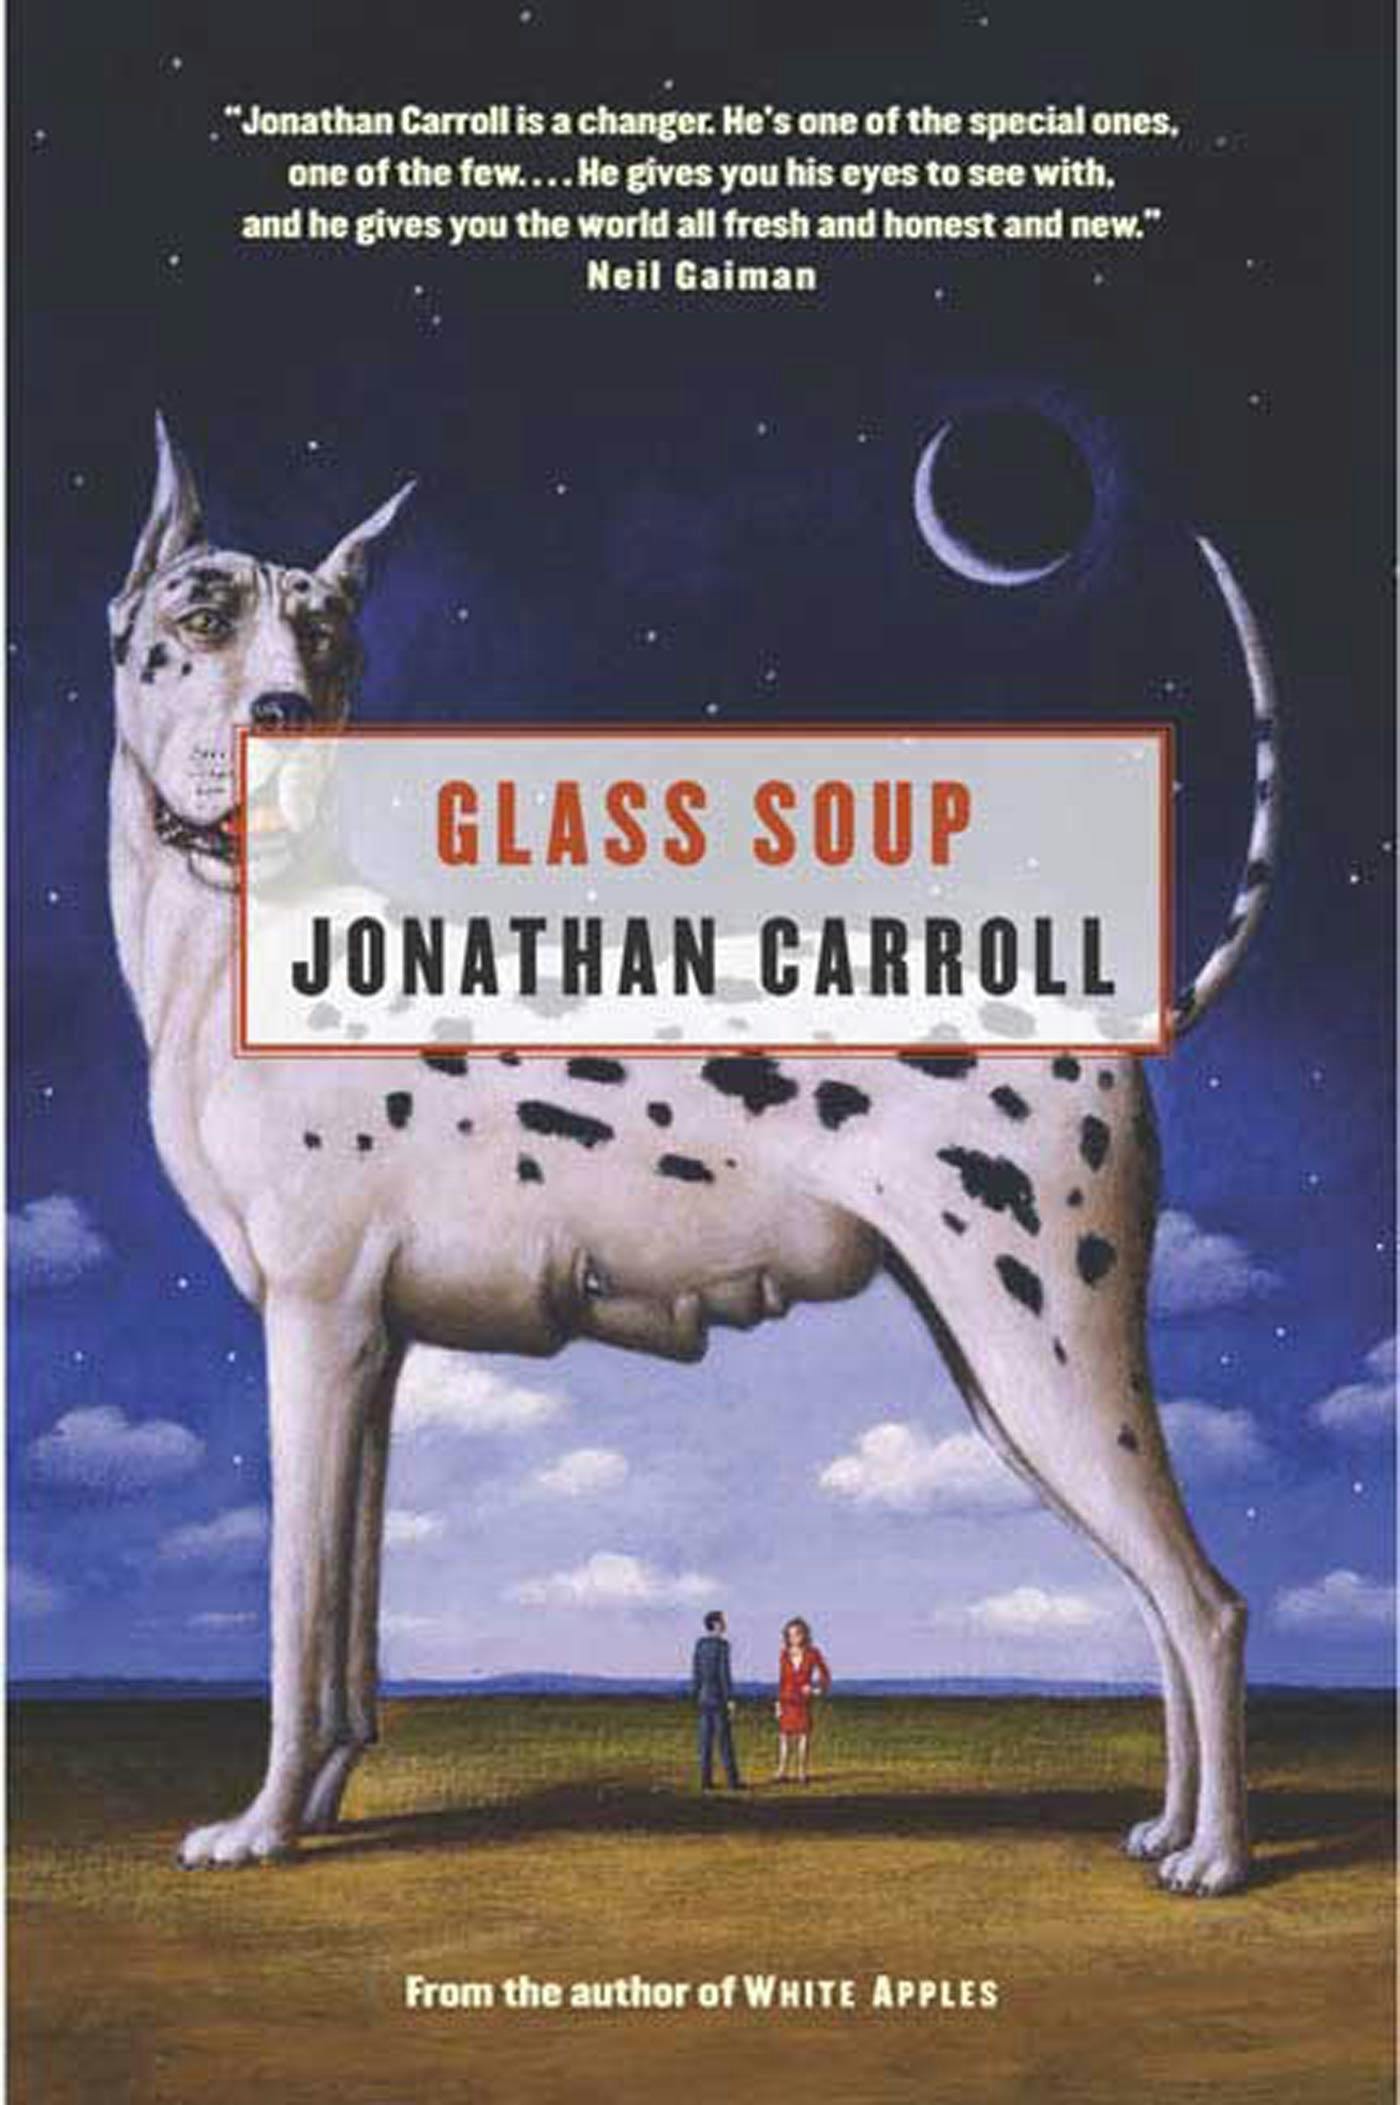 Cover for the book titled as: Glass Soup